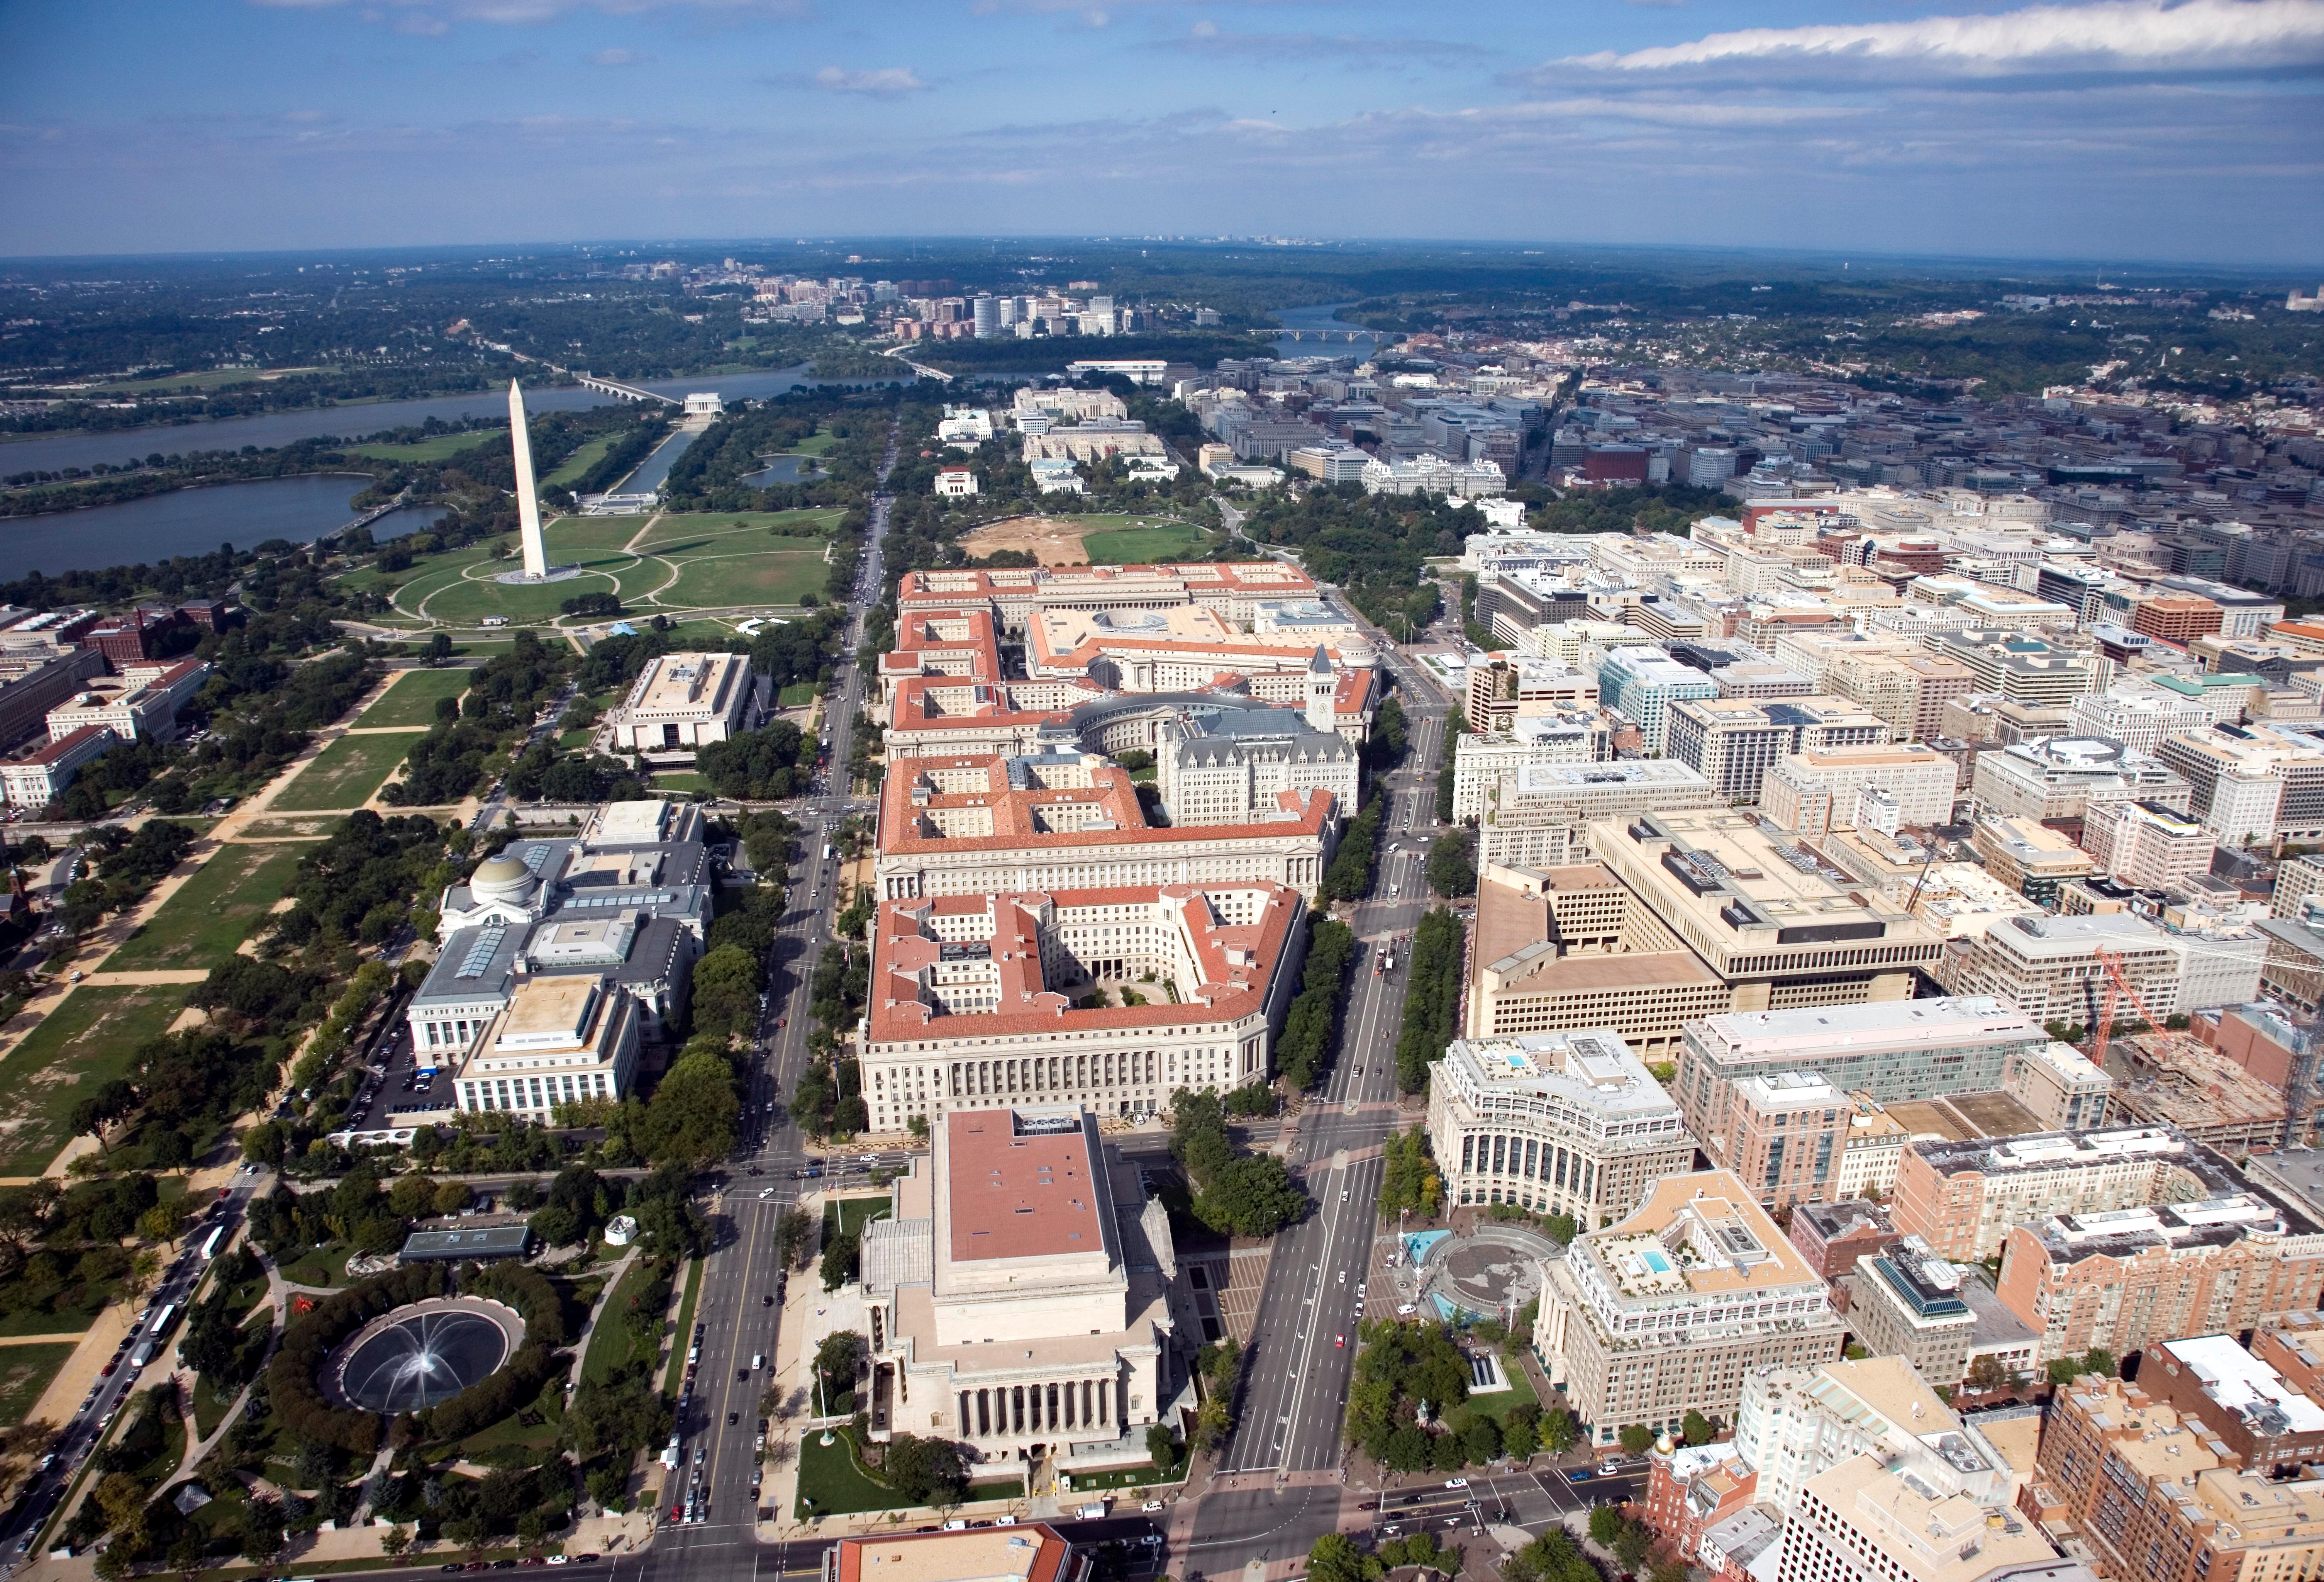 Aerial view of Pennsylvania Avenue (center right) and the Federal Triangle (center) – facing west towards Arlington County, Virginia – in Washington, D.C. Visible landmarks include the National Archives Building (center bottom), Constitution Avenue (center left), the National Museum of Natural History (left), and the Washington Monument (upper left), among other sites, located on the National Mall (left). Photo taken on September 20, 2006.